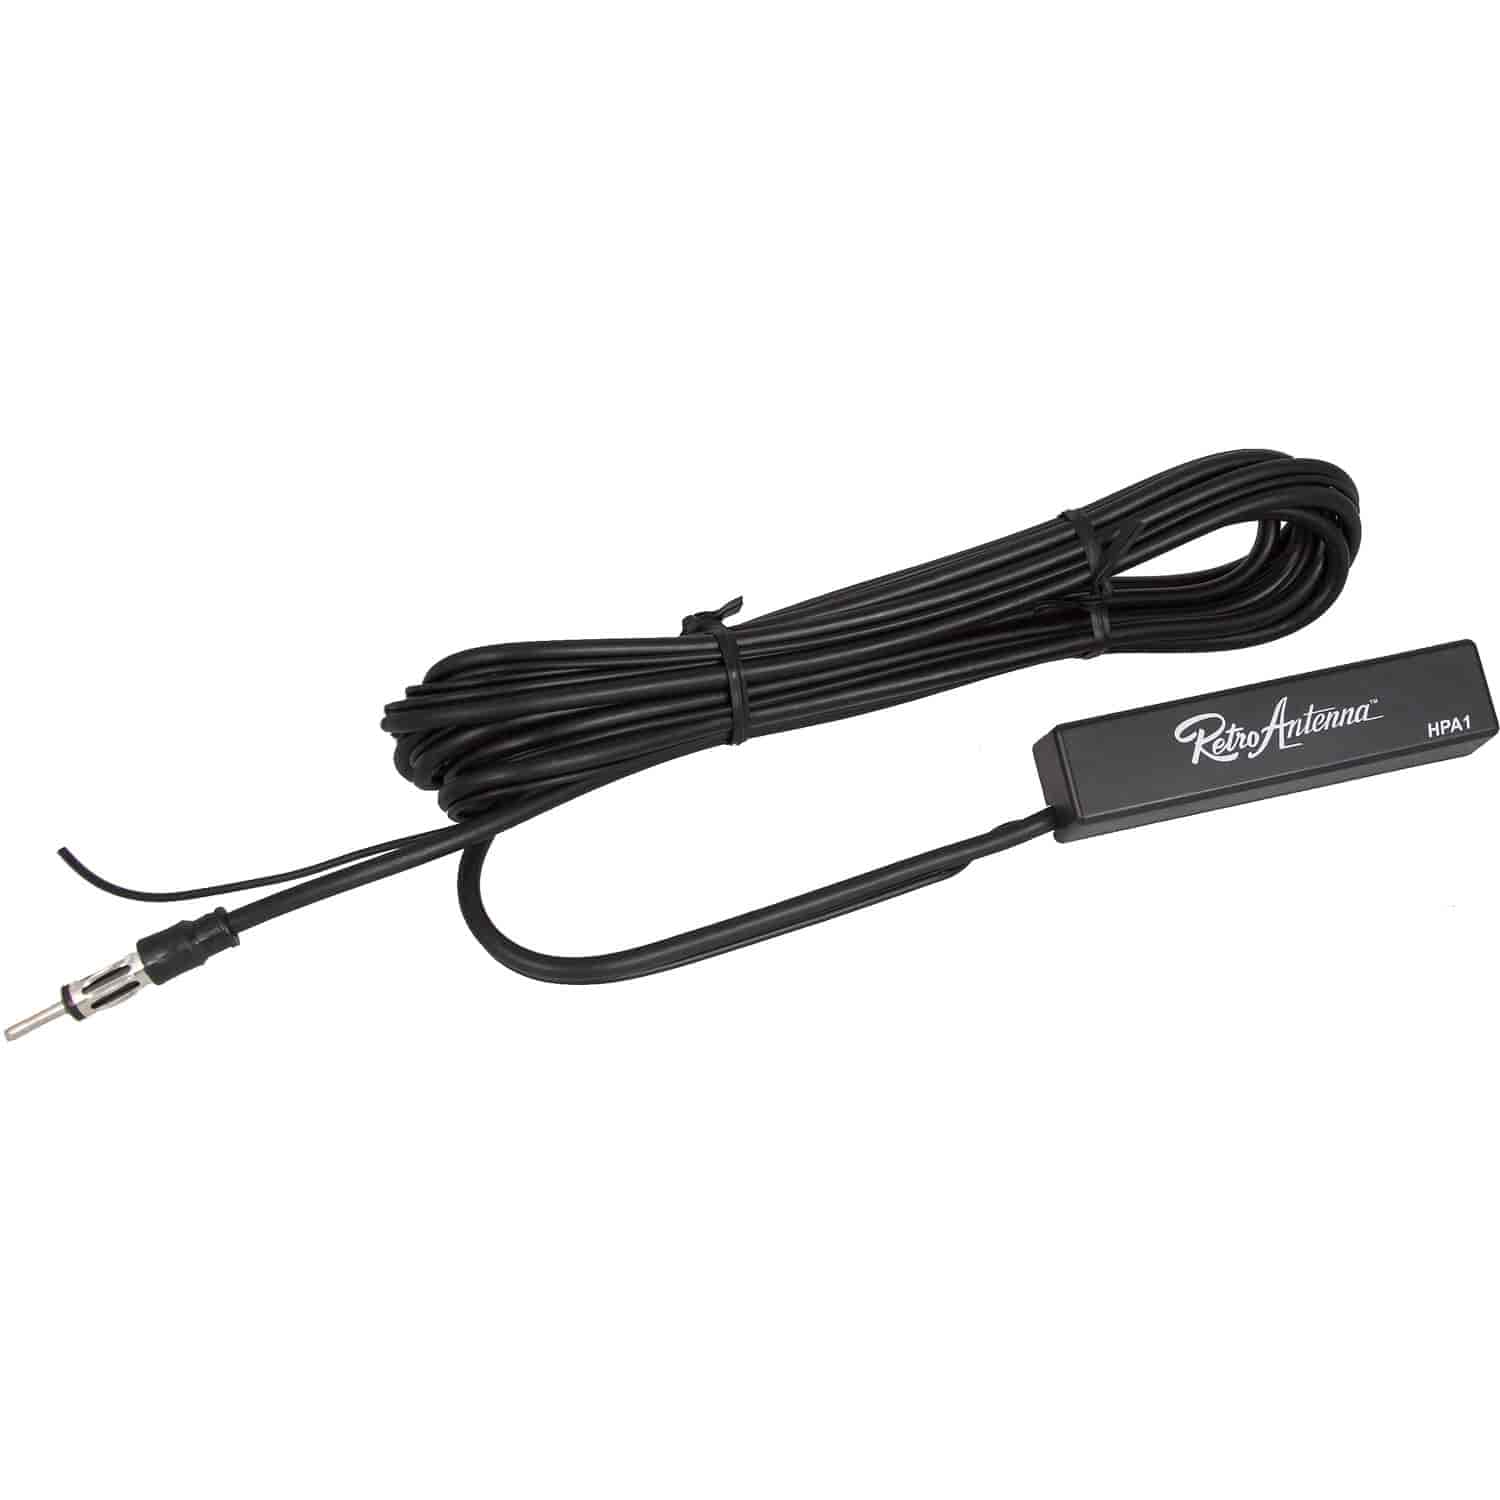 Amplified Hideaway Antenna Includes Power Lead and 105